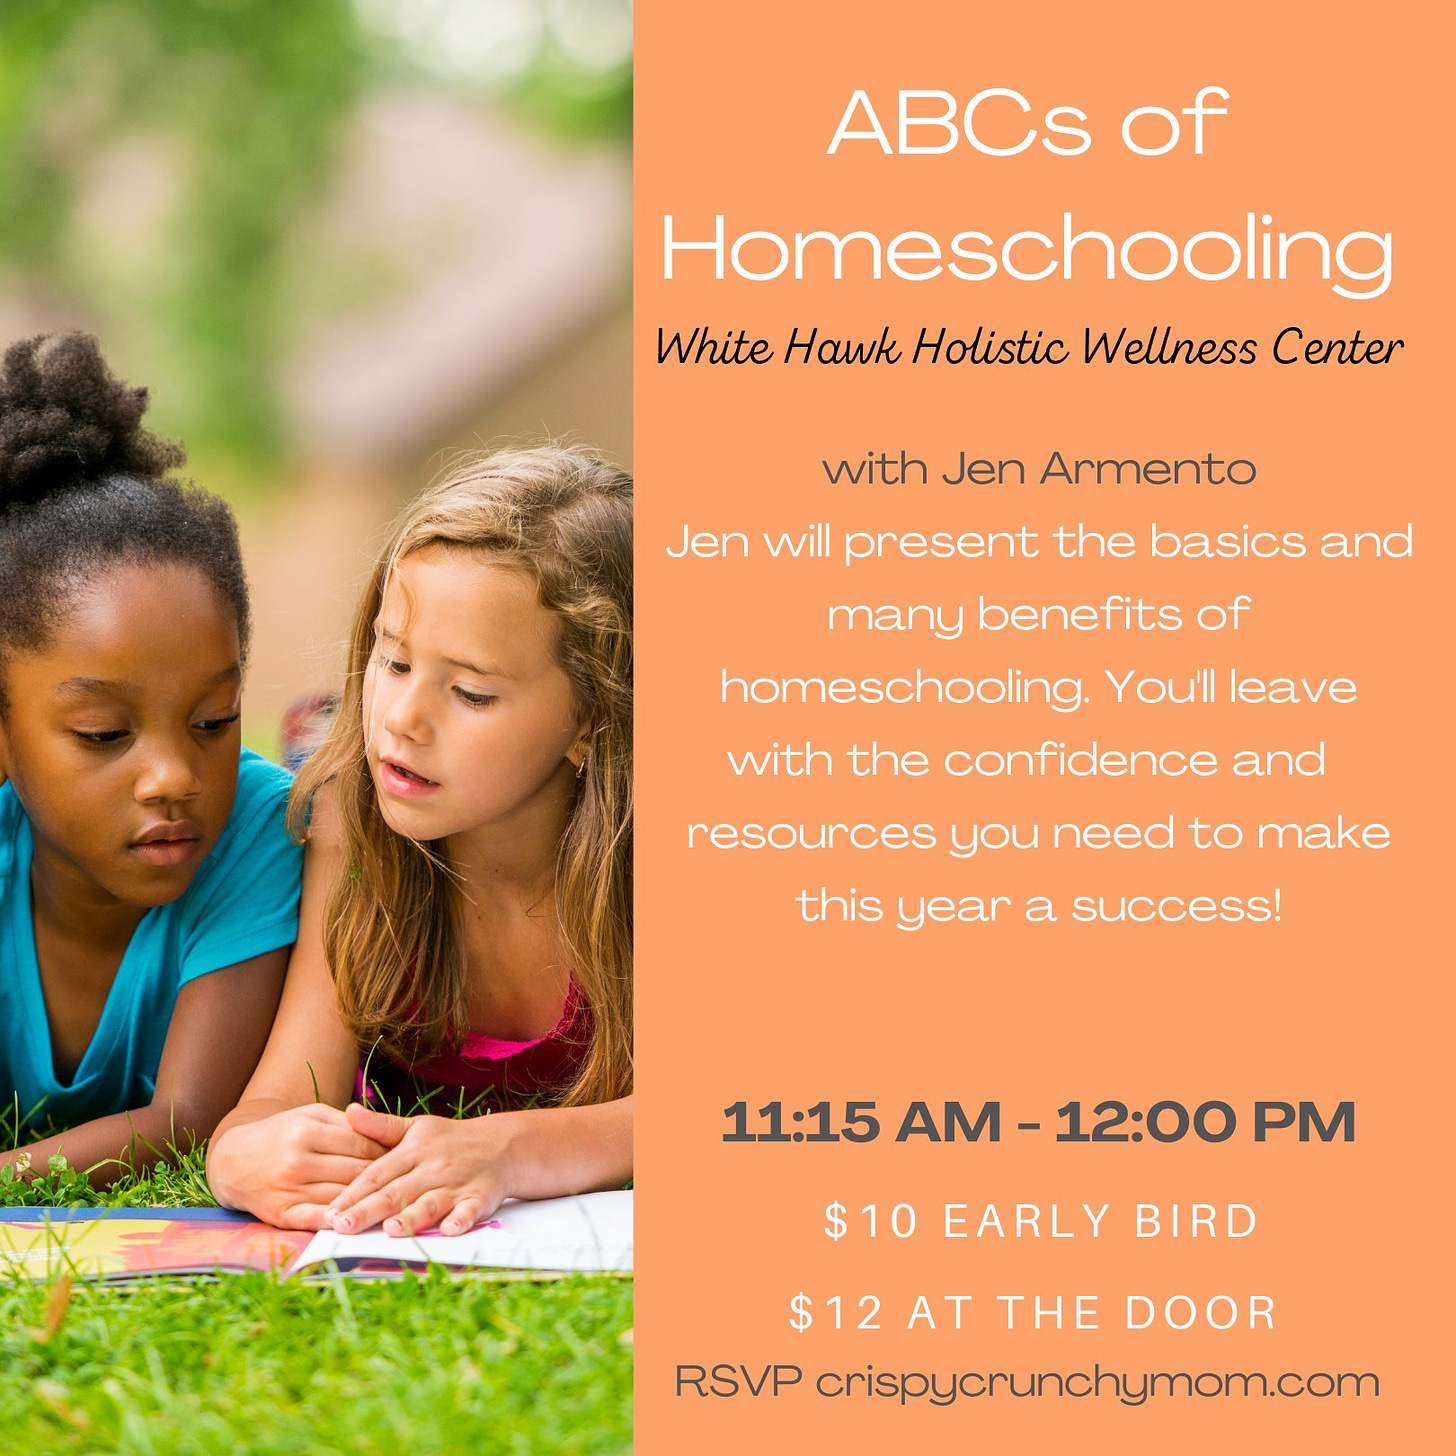 May be an image of 1 person, child and text that says 'ABCs of Homeschooling White Hawk Holistic Wellness Center with Jen Armento Jen will present the basics and many benefits of homeschooling. You'll leave with the confidence and resources you need to make this year a success! 11:15 AM -12:00 PM $10 EARLY BIRD $12 AT THE DOOR RSVP crispycrunchymom.com'